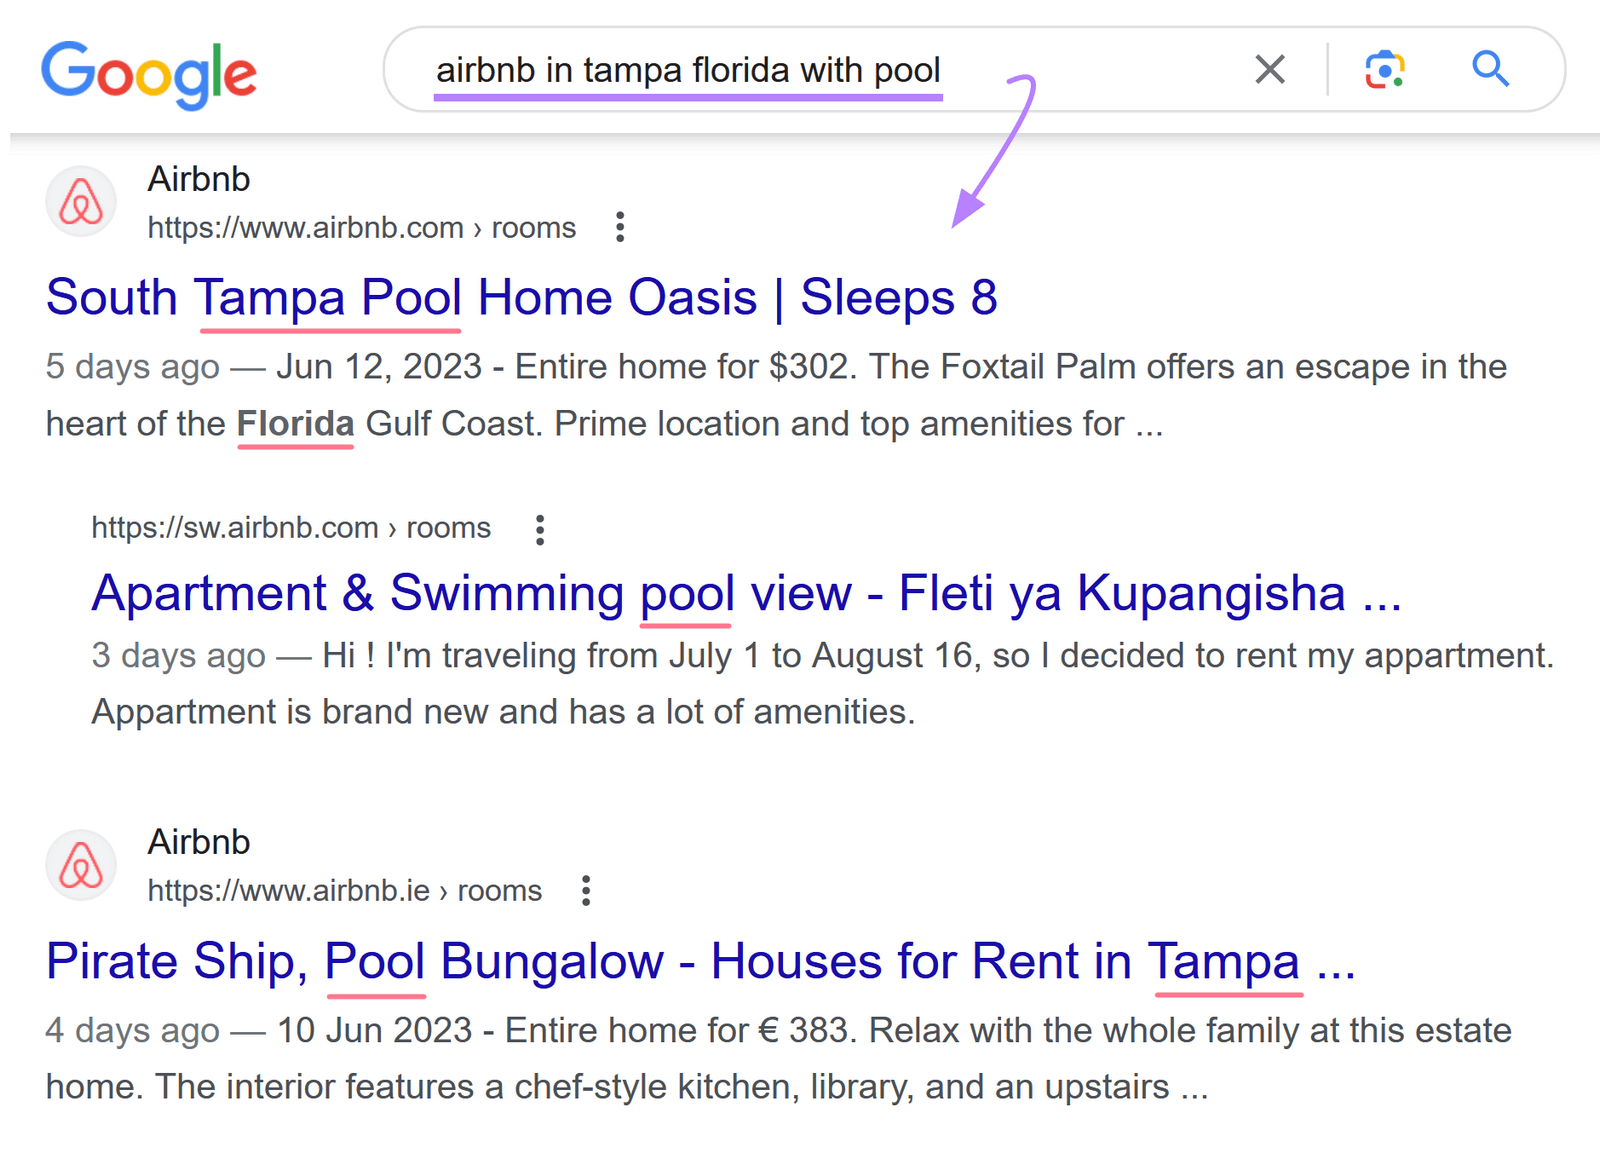 Google search for "airbnb in tampa florida with pool"